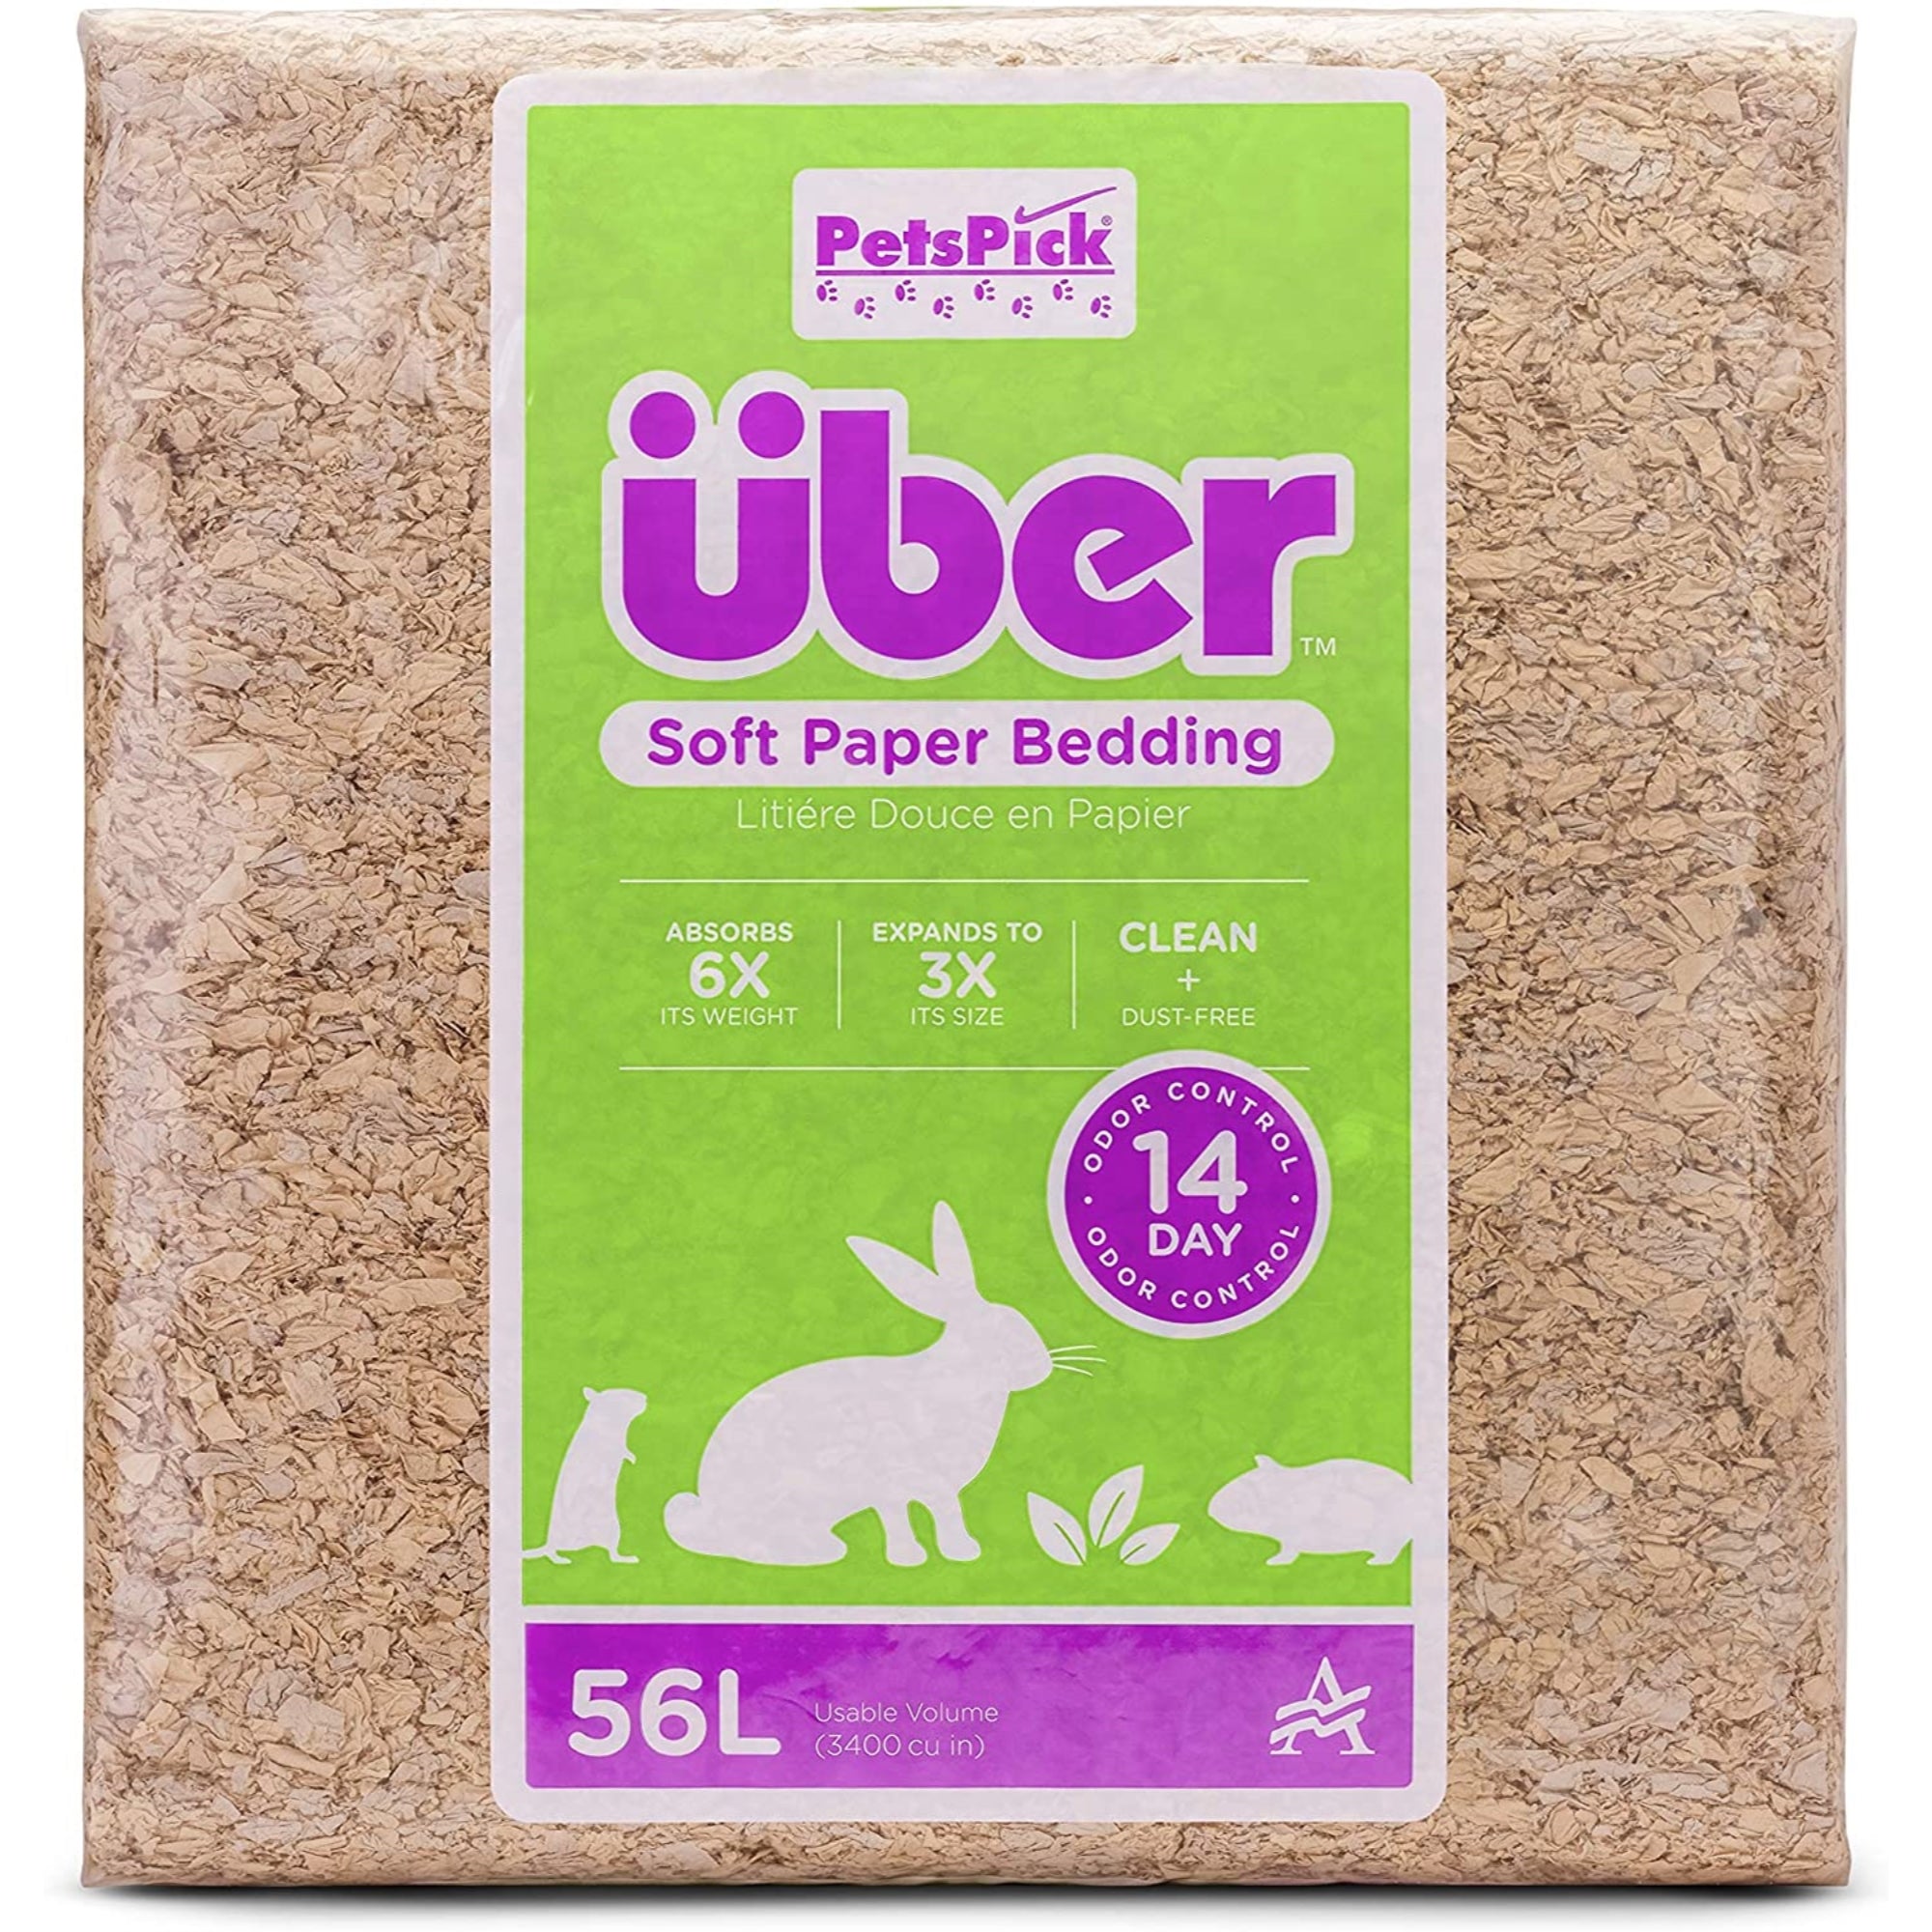 PetsPick Uber Soft Paper Pet Bedding for Small Animals, Natural 56L